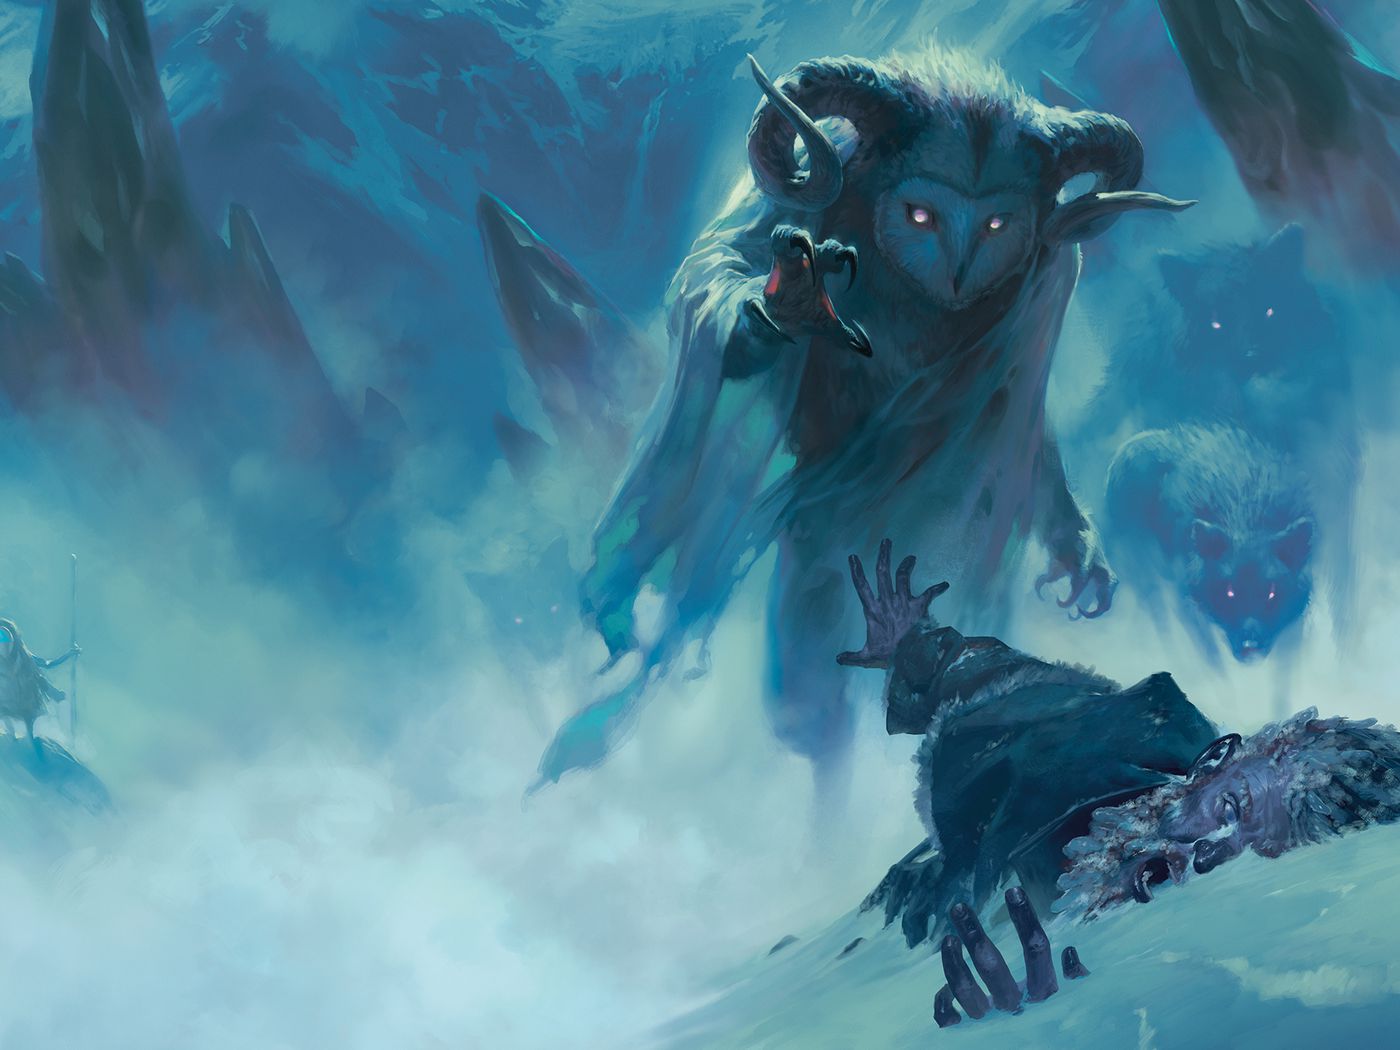 D&D's next campaign sourcebook is Icewind Dale: Rime of the Frostmaiden